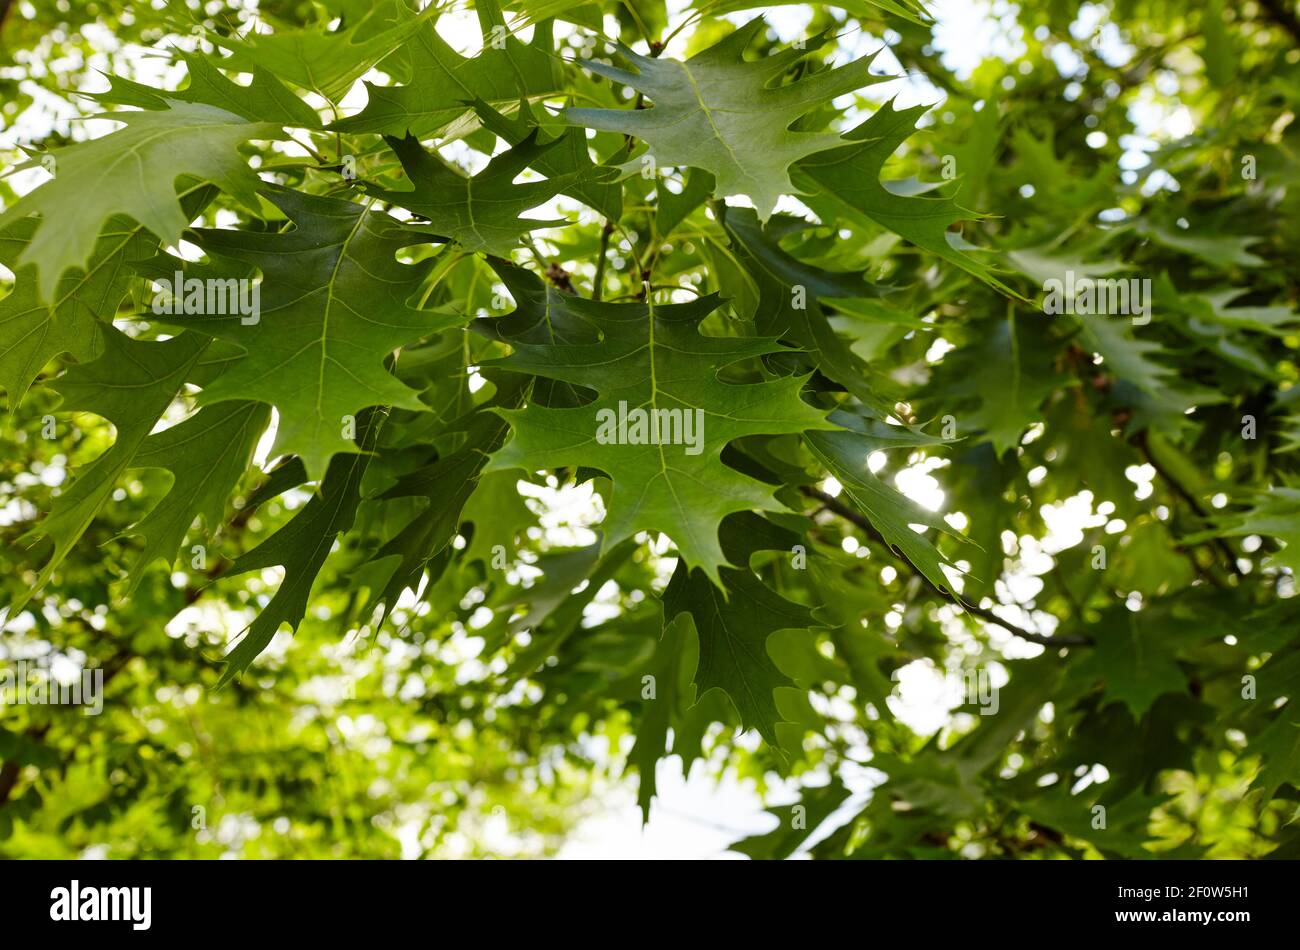 Oak branch with green leaves on a sunny day. Oak tree in spring. Blurred leaf background. Stock Photo